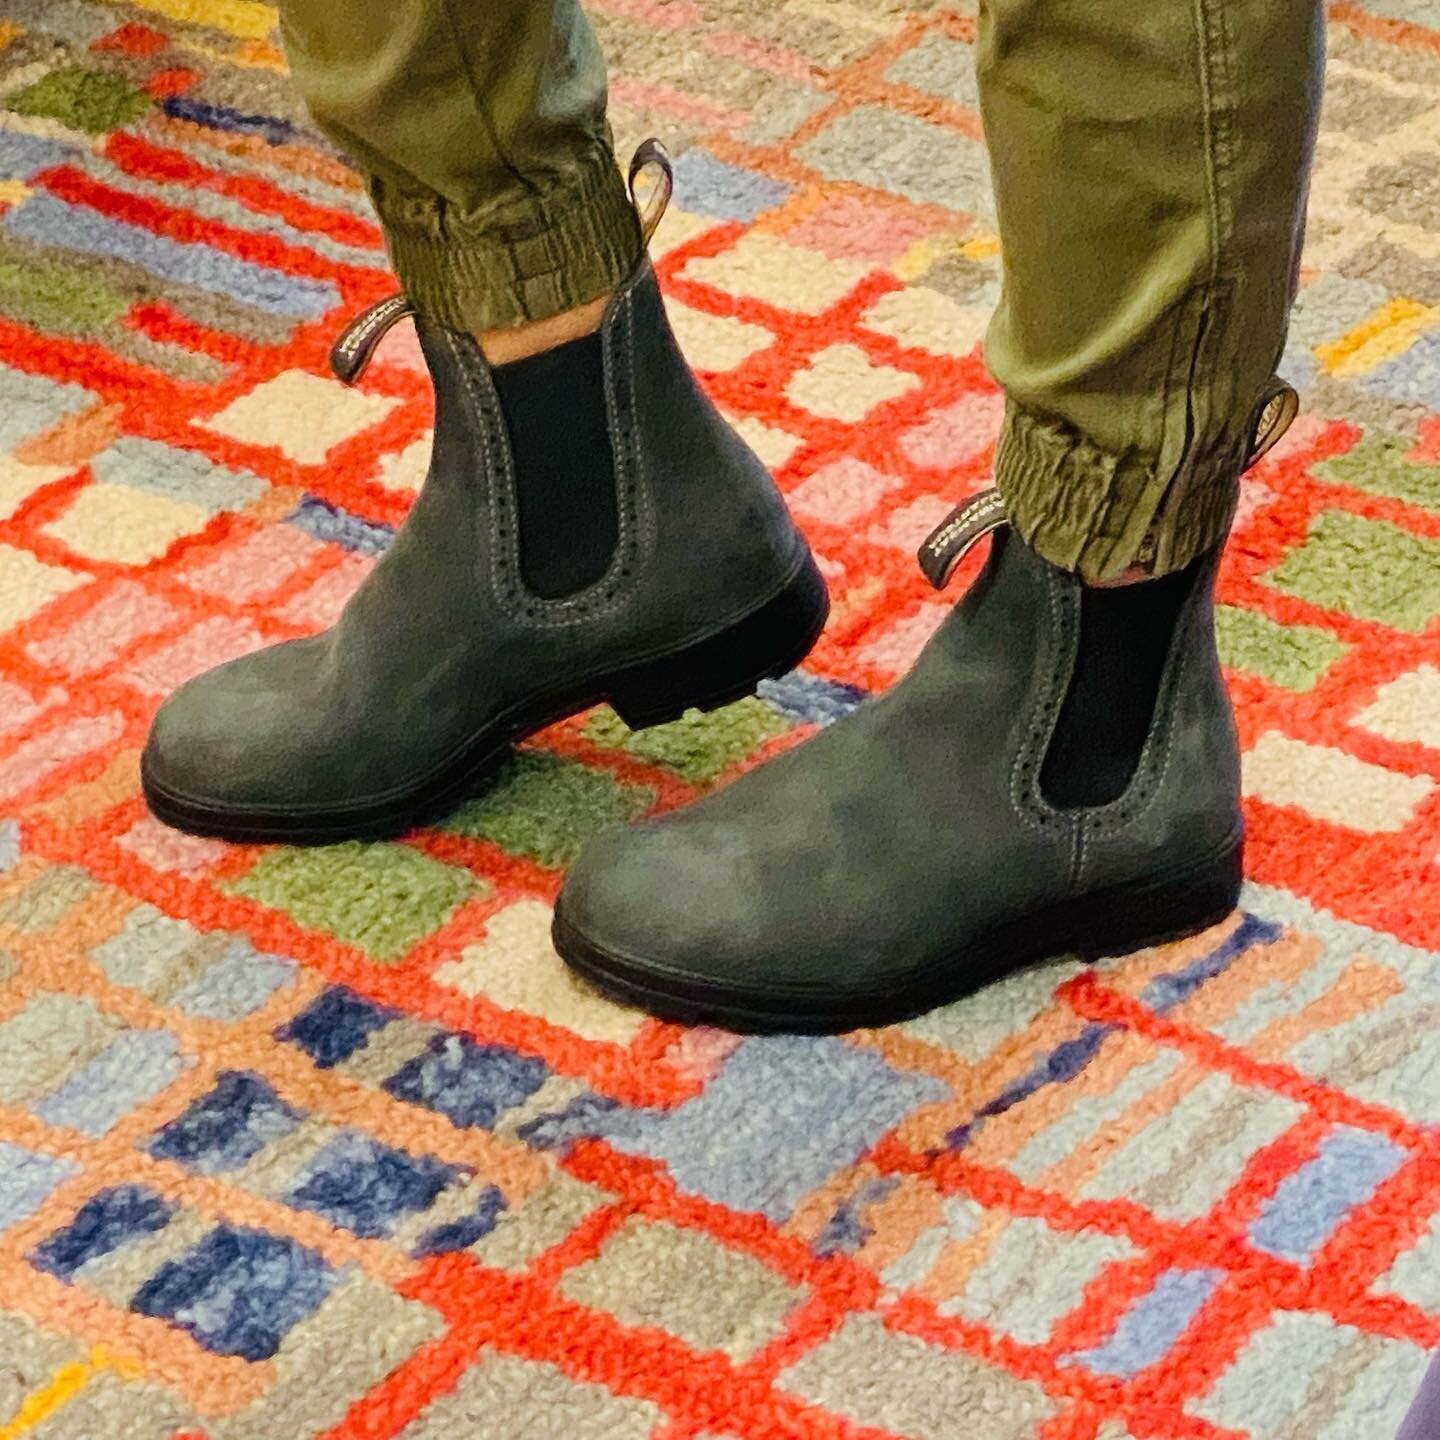 Blundstones could be the best year round boot yet! Come get yours at MonkeyLove! 

#mountaintownlife #adventurealways#visitmccall #shoppinginmccall #mccallidaho #shoplocal #lounge #lounging #winterboots #blundstone #mountaintown #bestboots